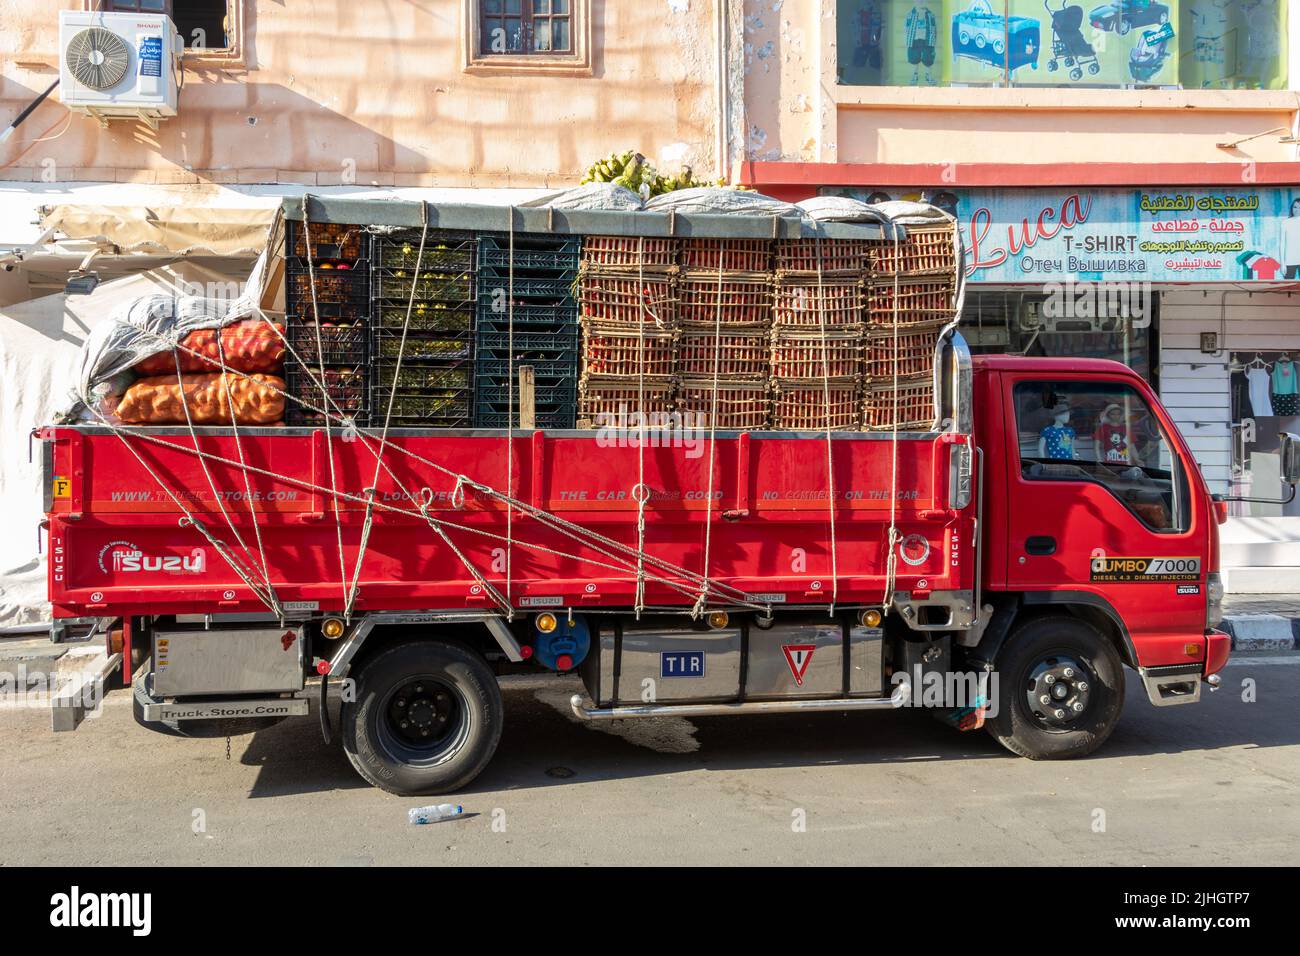 Egypt, Sharm El Sheikh - July 02, 2022: A truck loaded with various fruits and vegetables in Egypt. Stock Photo